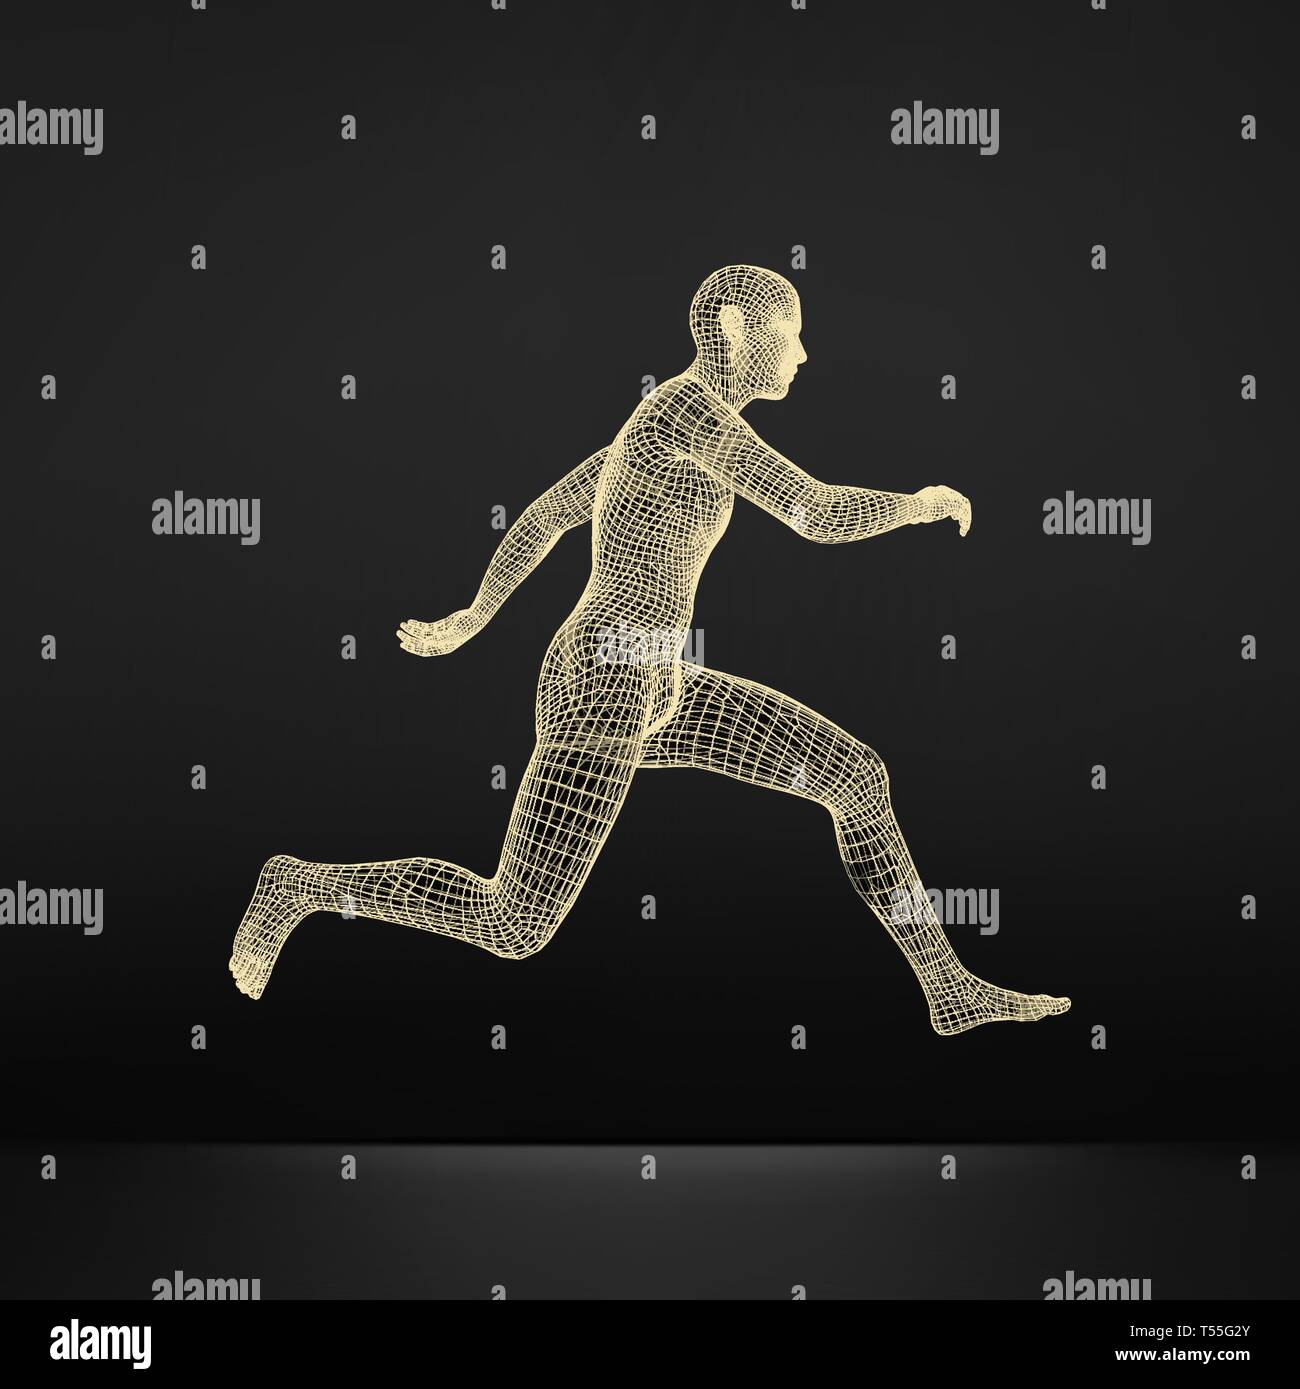 3d Running Man. Human Body Wire Model. Sport Symbol. Low-poly Man in Motion. Vector Geometric Illustration. Stock Vector